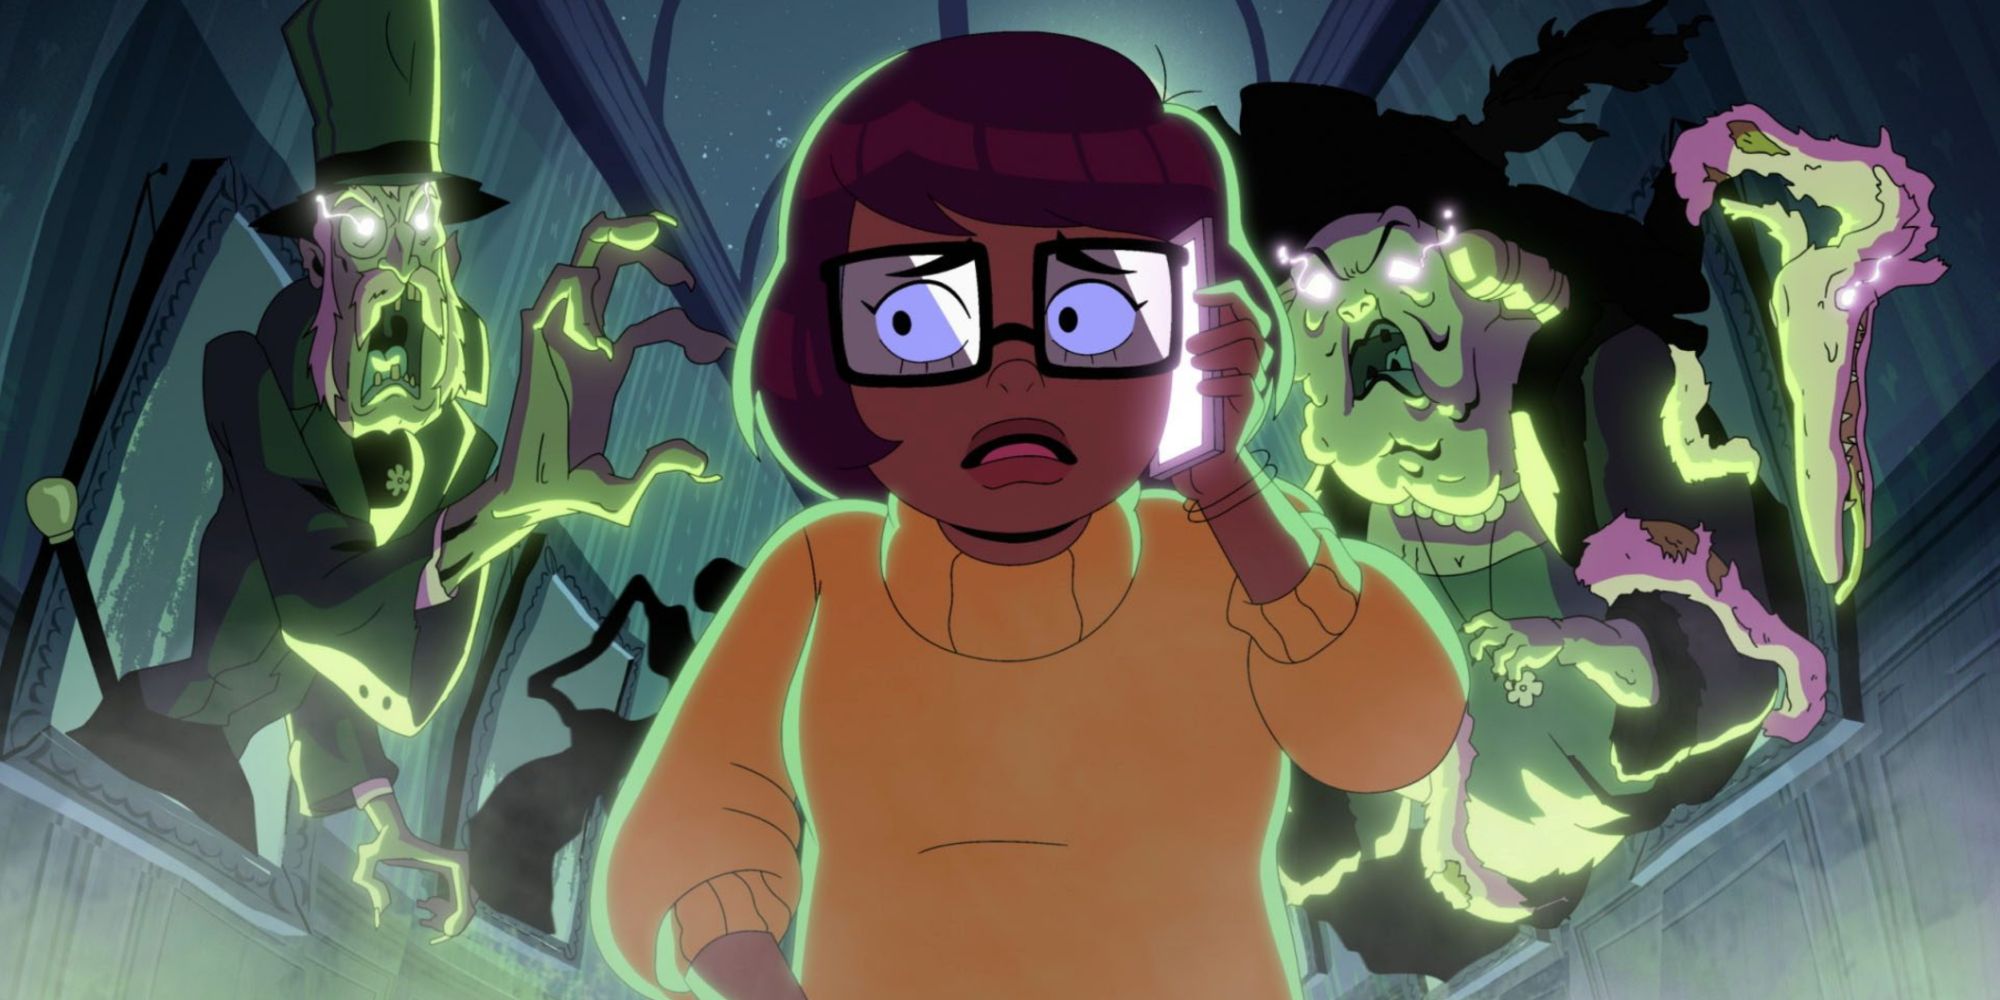 Velma' Continues to Defy the Haters, Gets Better Every Episode